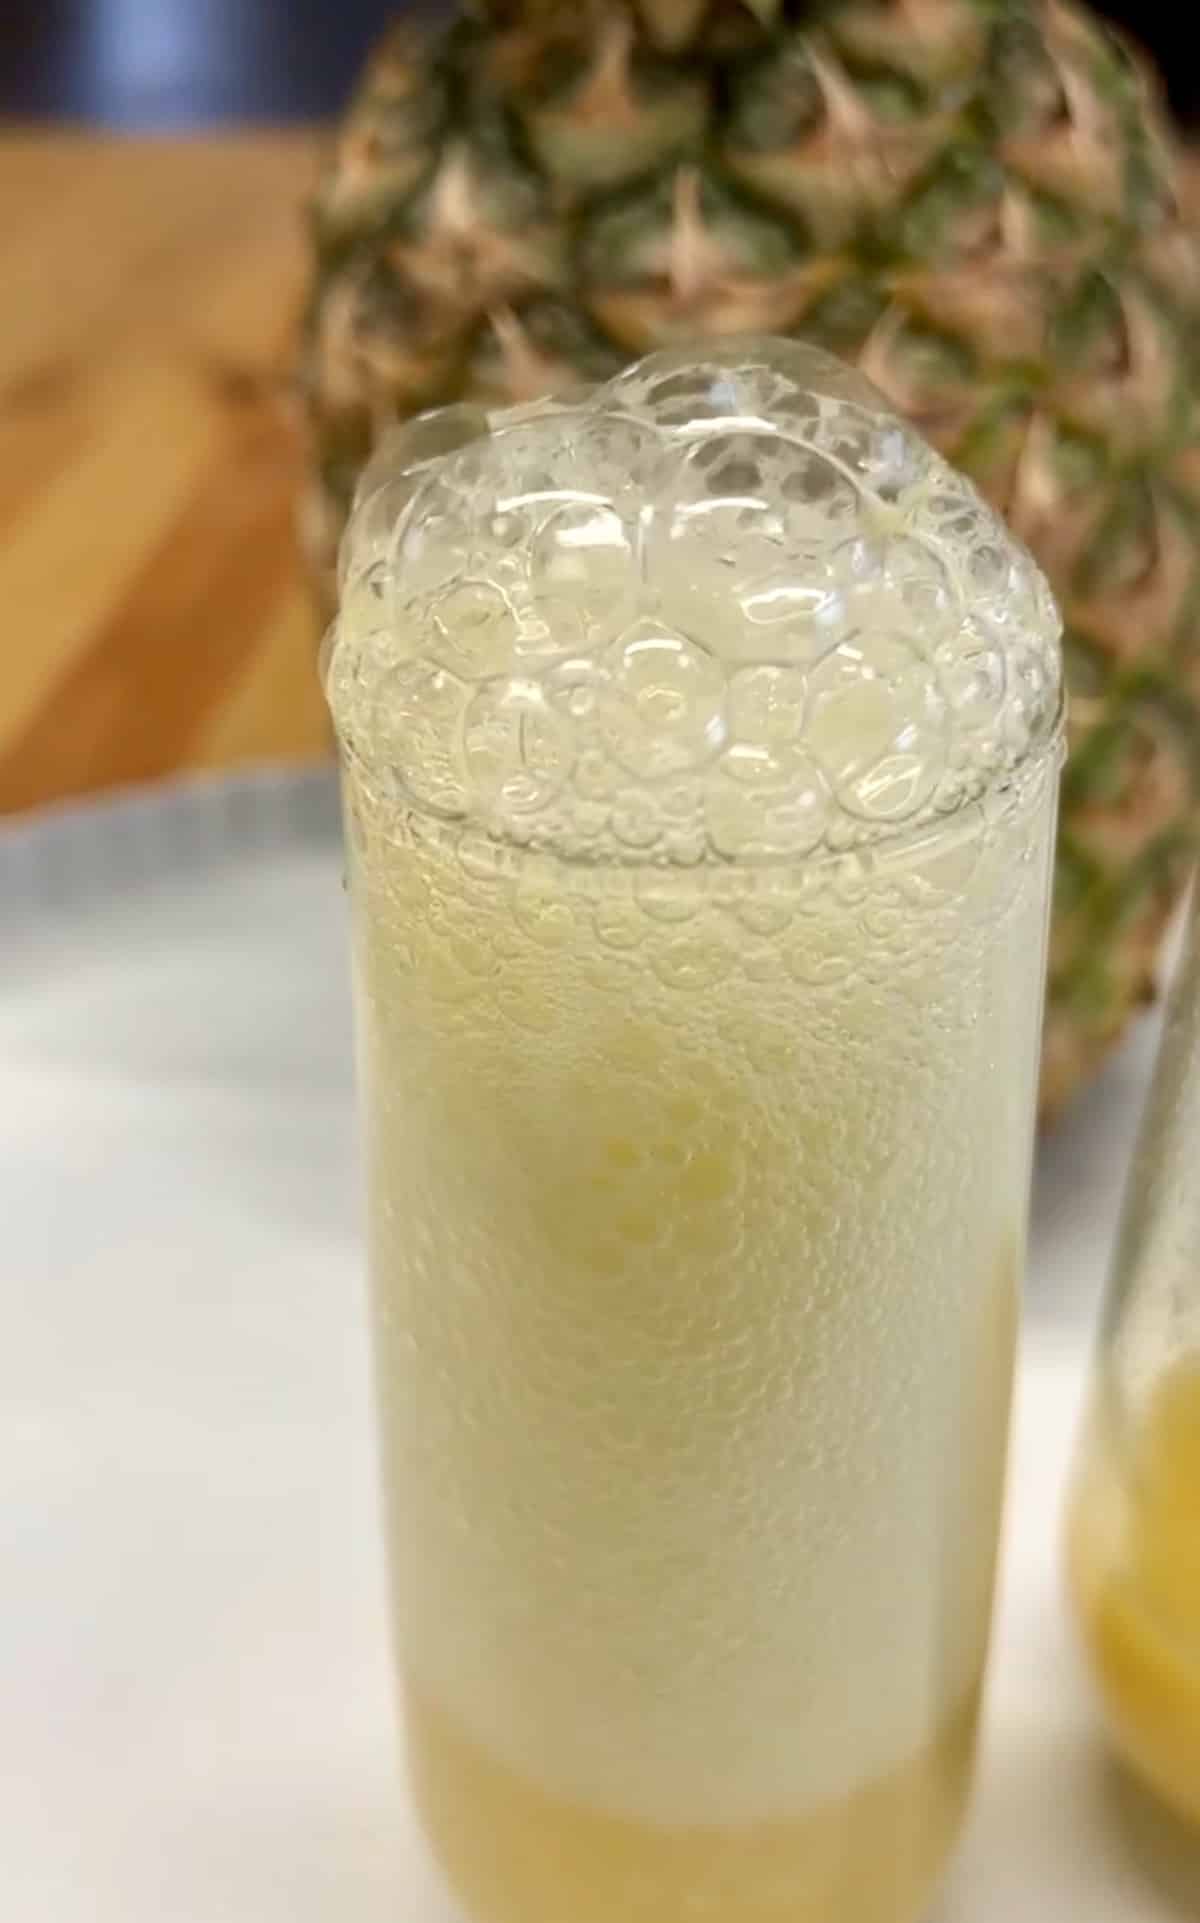 Pineapple mimosa with sparkling wine bubbling out the top of glass.